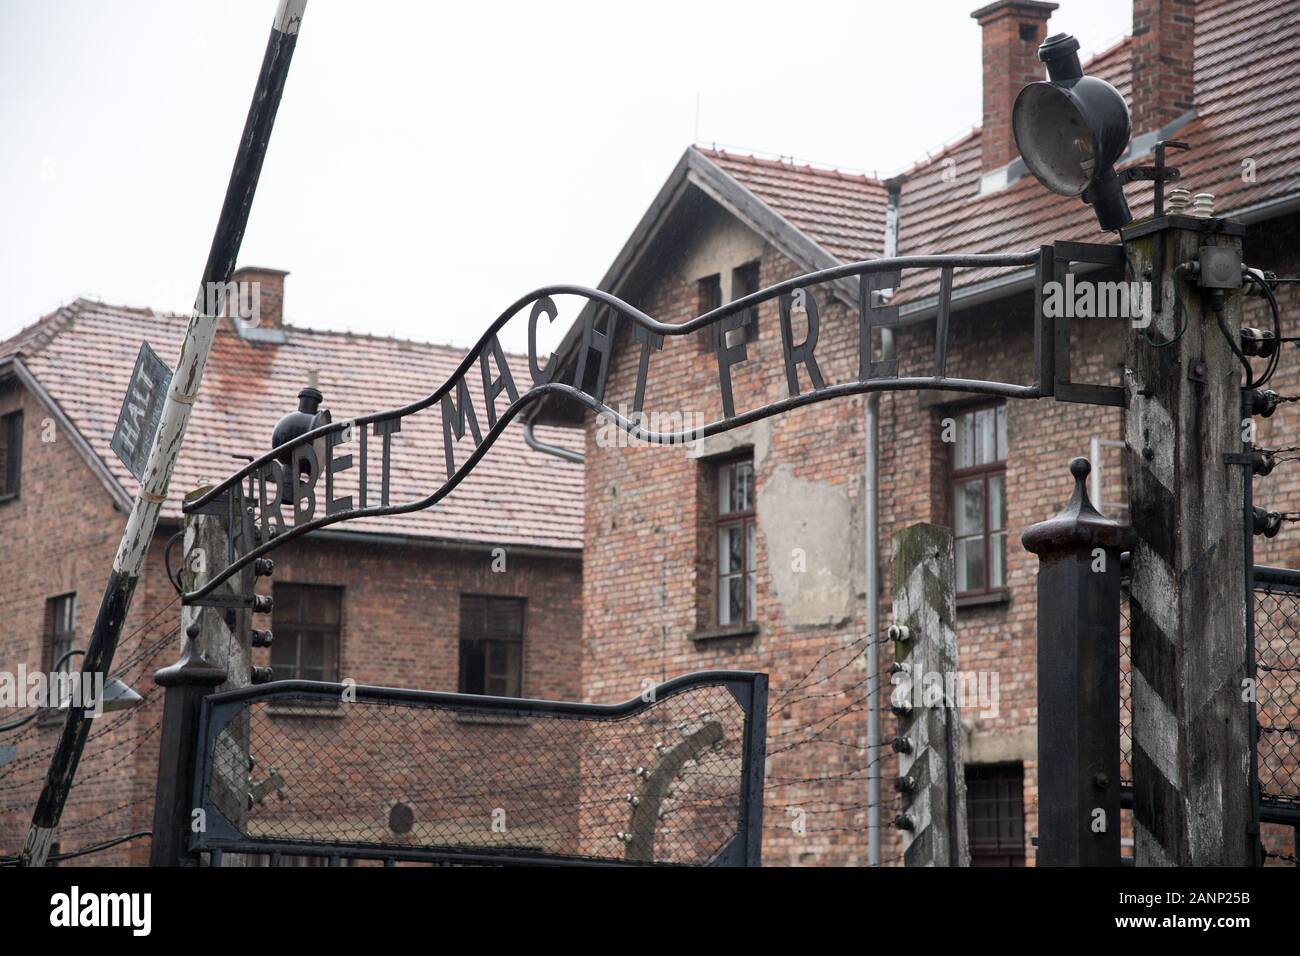 Arbeit macht frei sign (in German Work sets you free) main gate to Nazi German Konzentrationslager Auschwitz I Stammlager (Auschwitz I concentration c Stock Photo